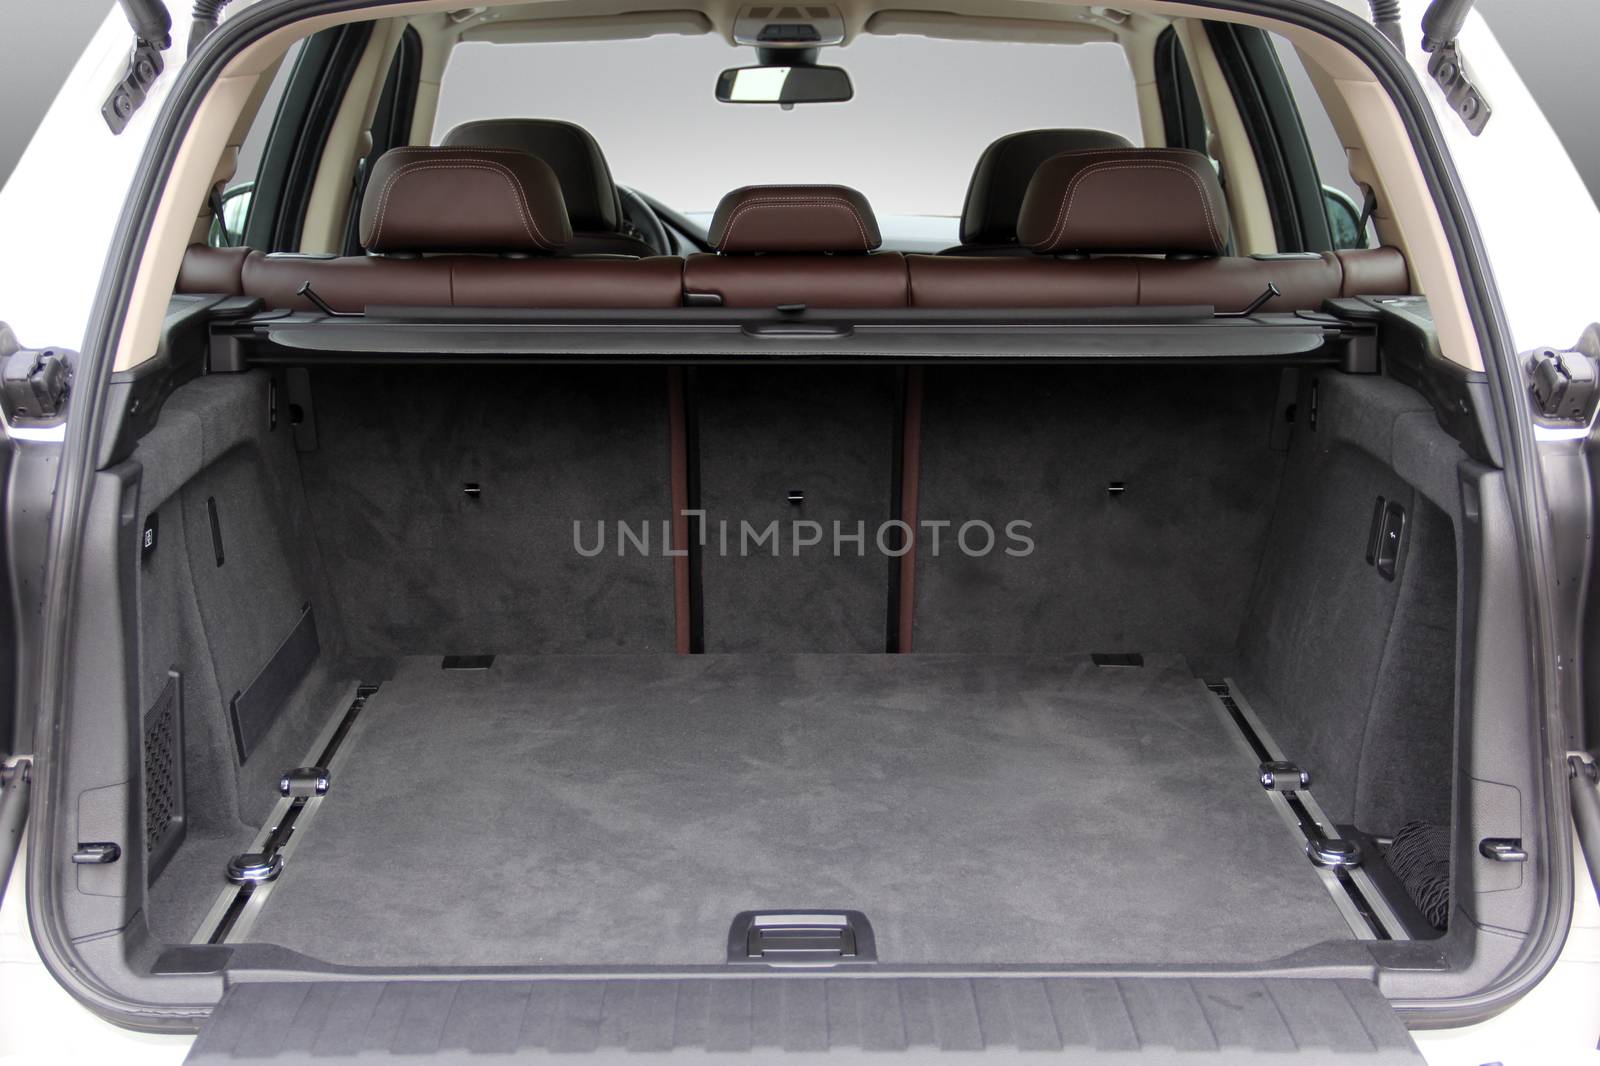 Empty trunk of the passenger car